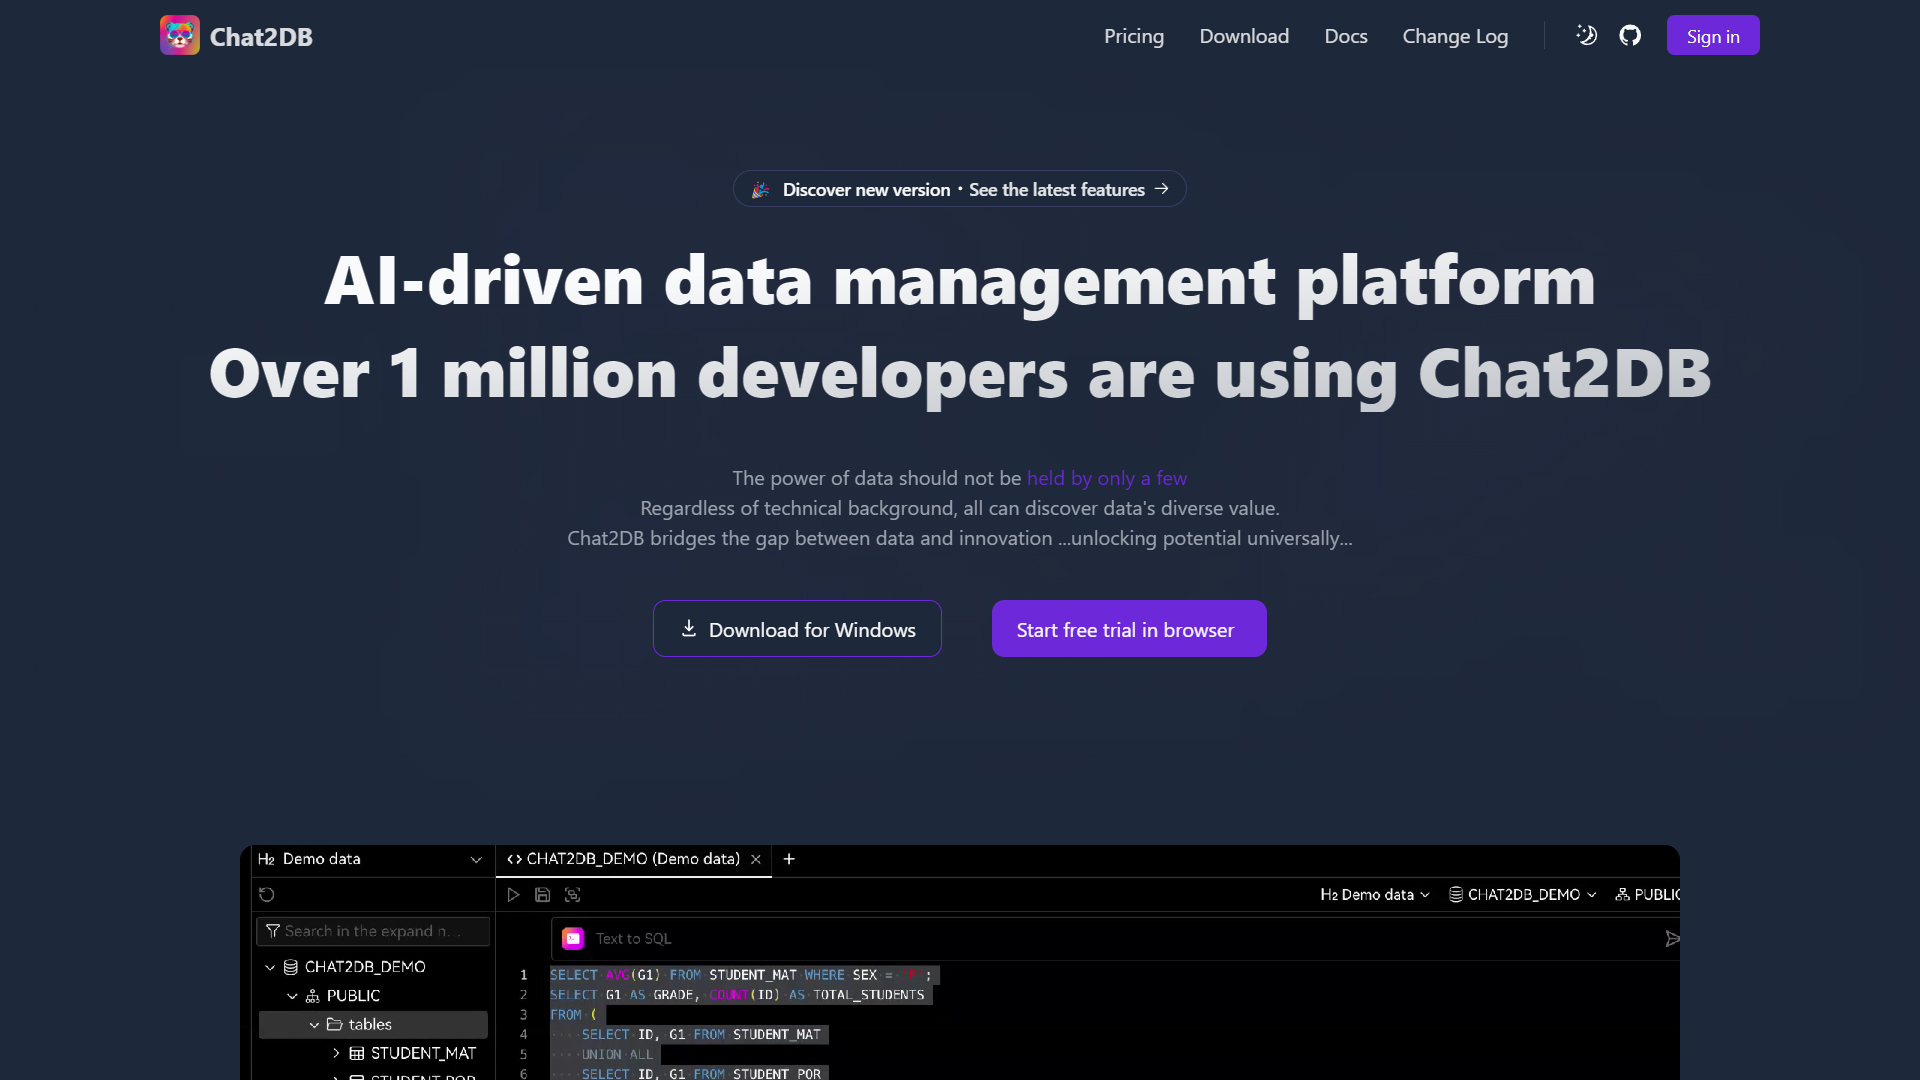 A cross-platform multi-database management tool equipped with AI-driven features for intelligent SQL development, intelligent reporting, and data exploration.